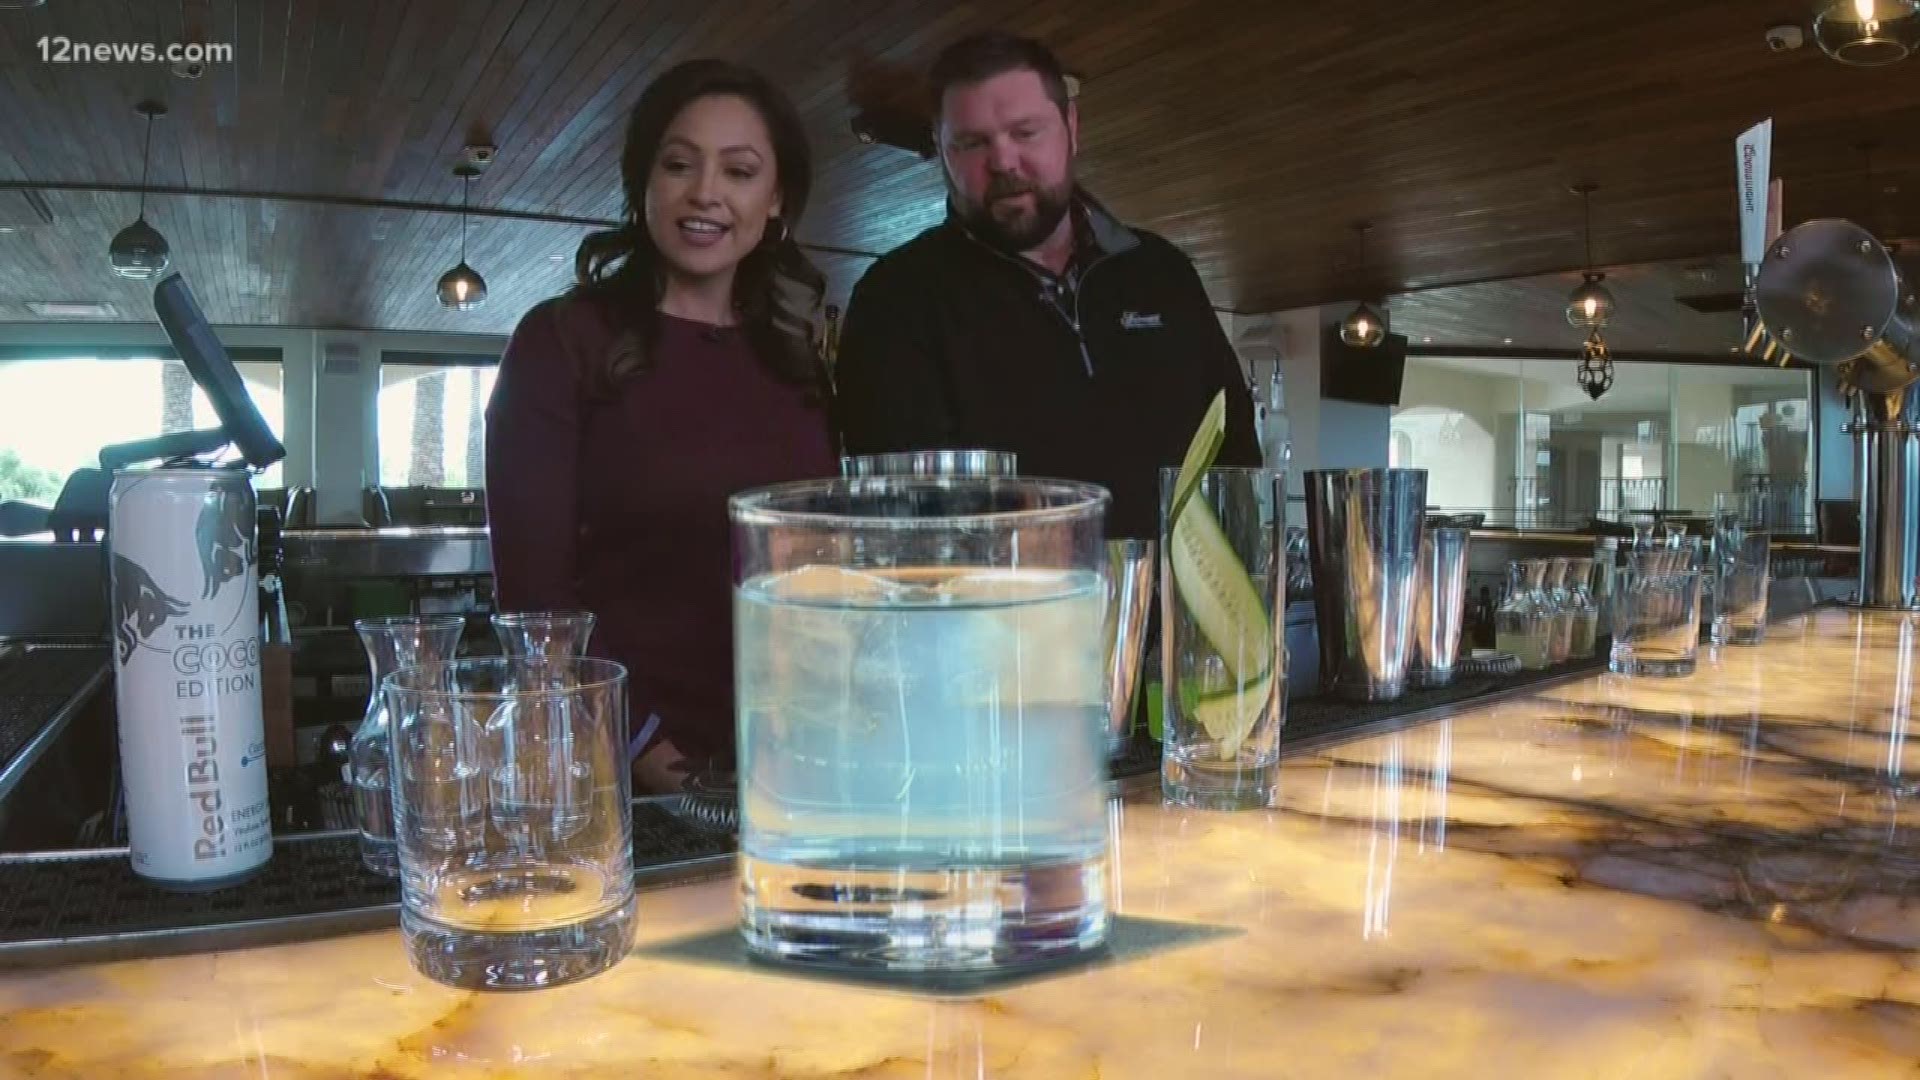 If your not into golf at the Waste Management Phoenix Open, you are probably sipping a refreshing cocktail at the Plaza Bar.